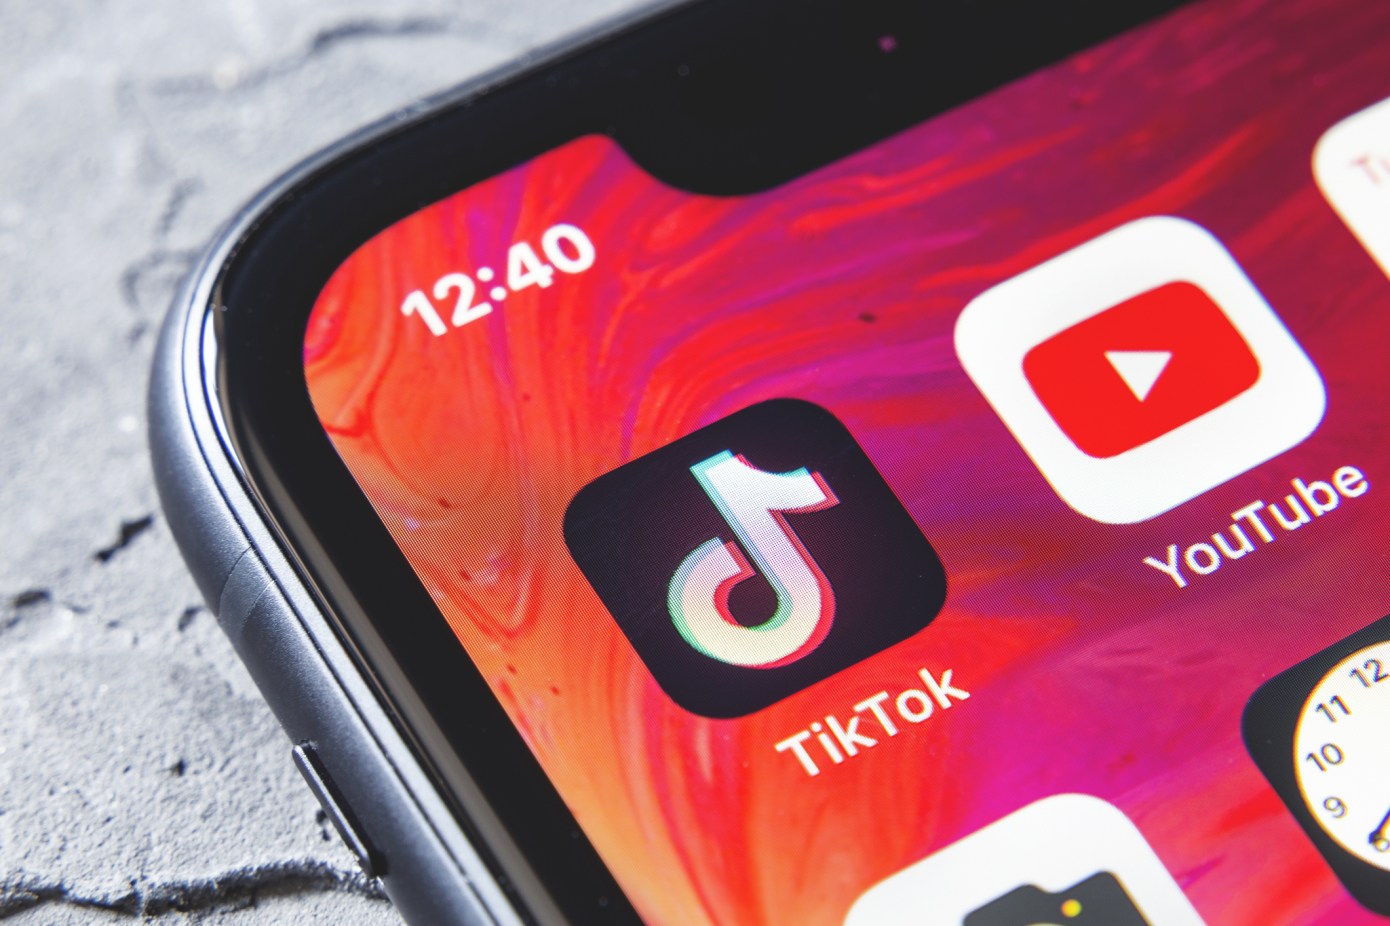 Kids and teens now spend more time watching TikTok than YouTube, new data shows